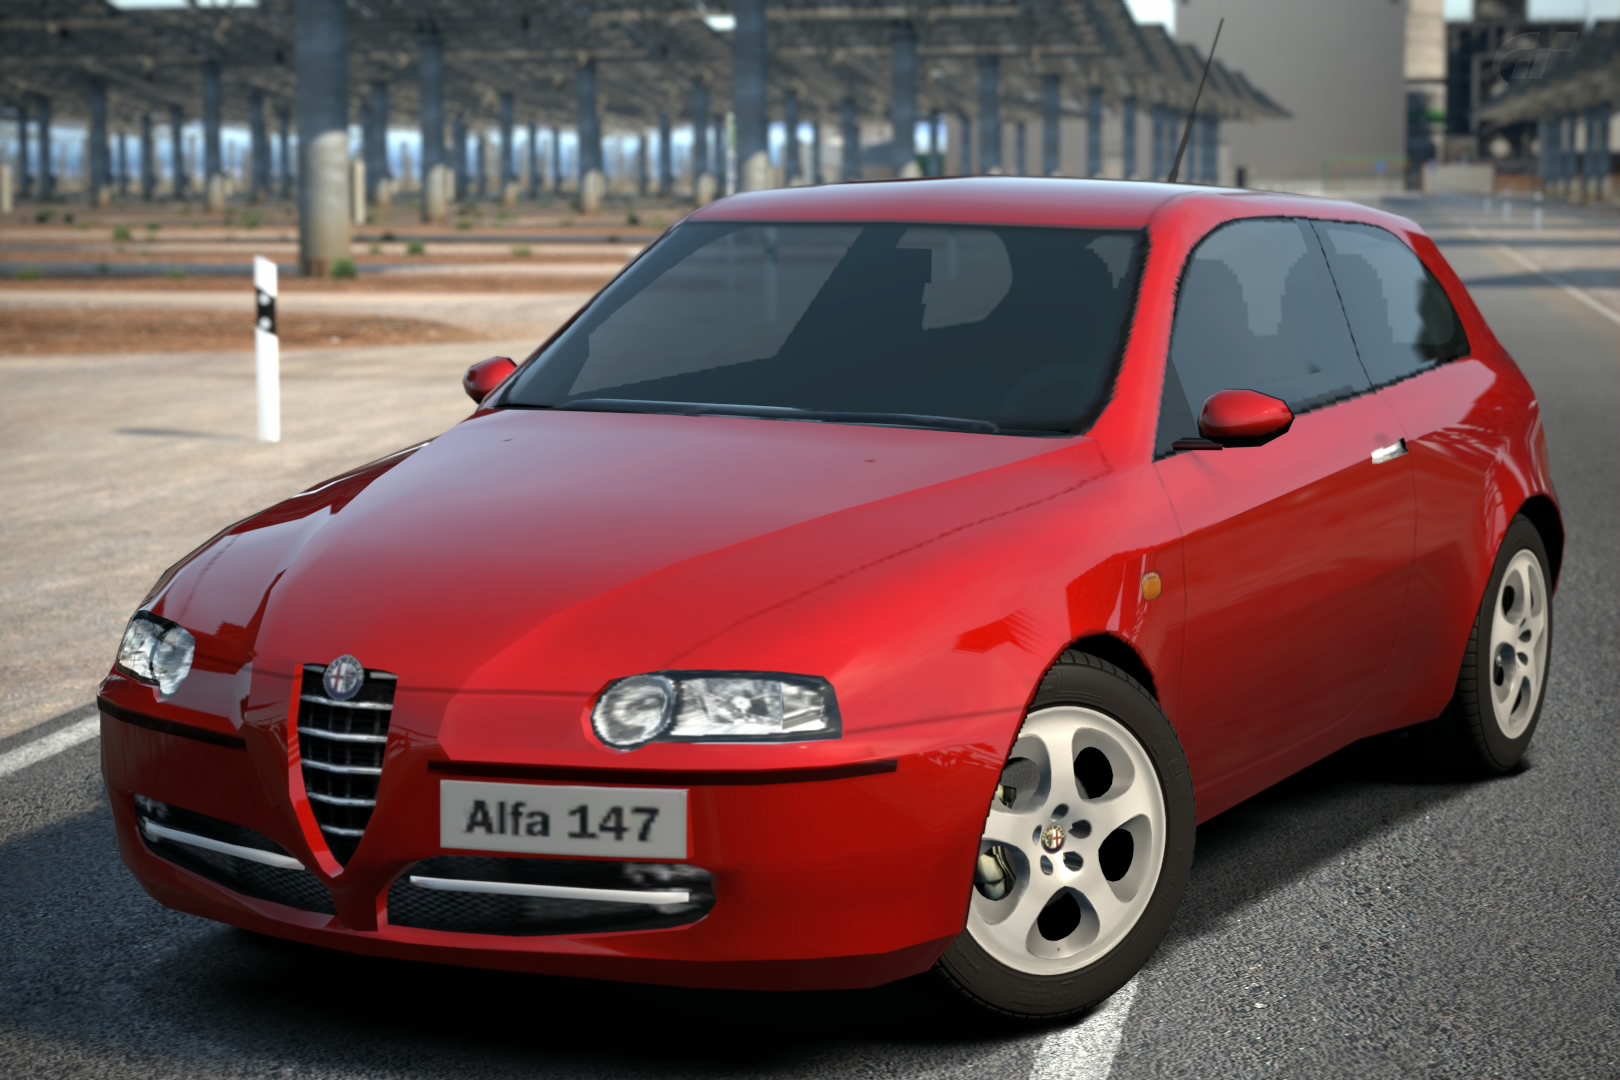 https://static.wikia.nocookie.net/gran-turismo/images/d/d4/Alfa_Romeo_147_2.0_TWIN_SPARK_%2702_%28GT6%29.jpg/revision/latest?cb=20181005013534